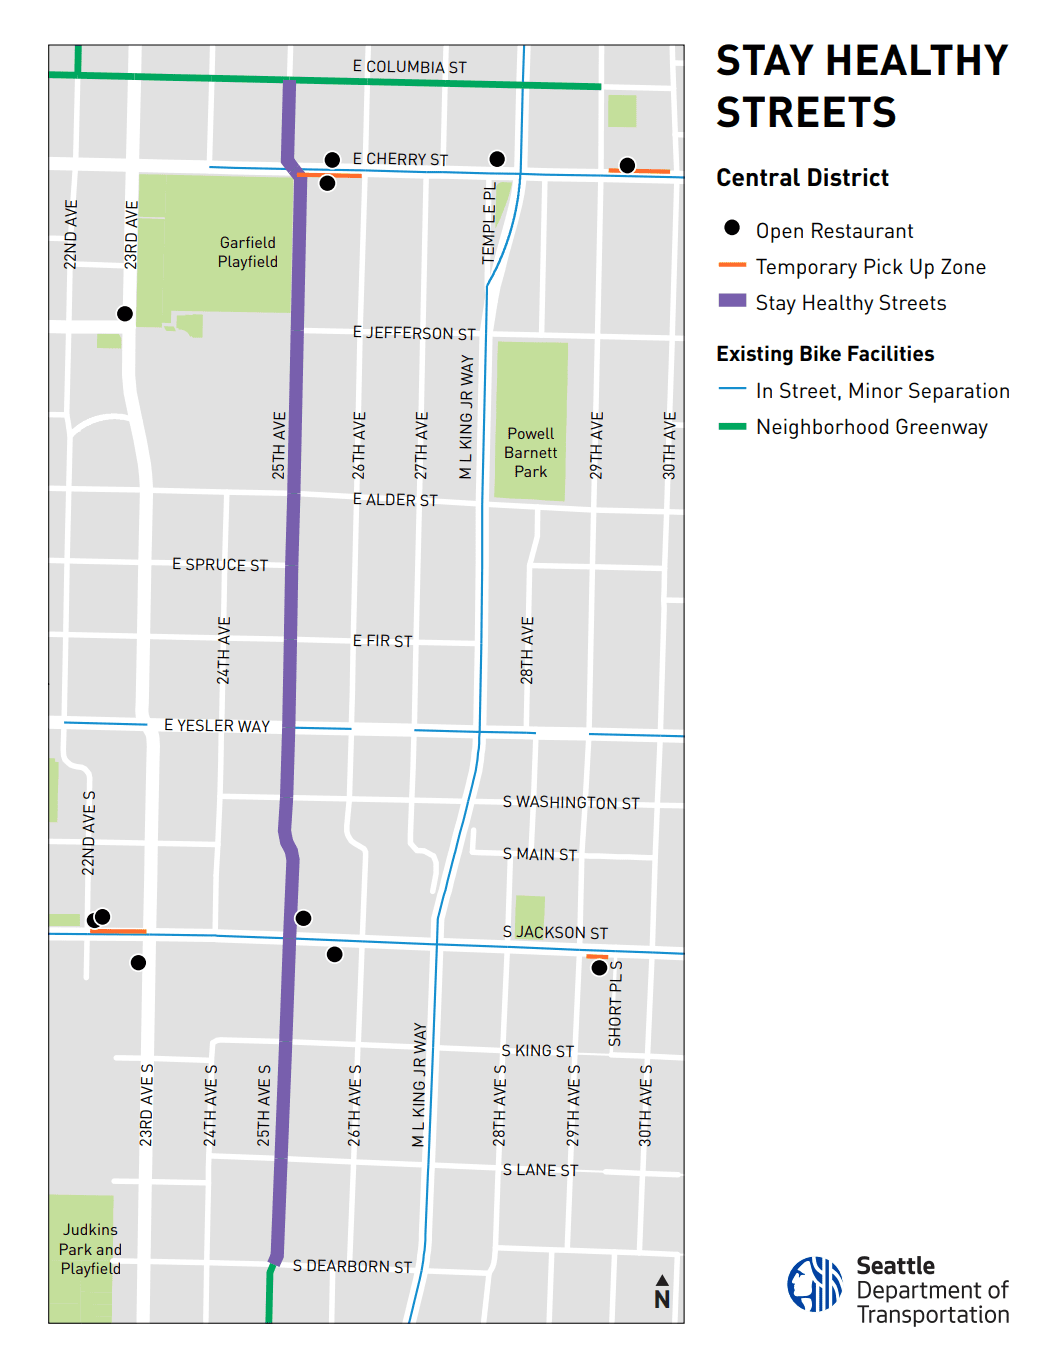 The Stay Healthy Streets route in the Central District will use 25th Avenue. (SDOT)